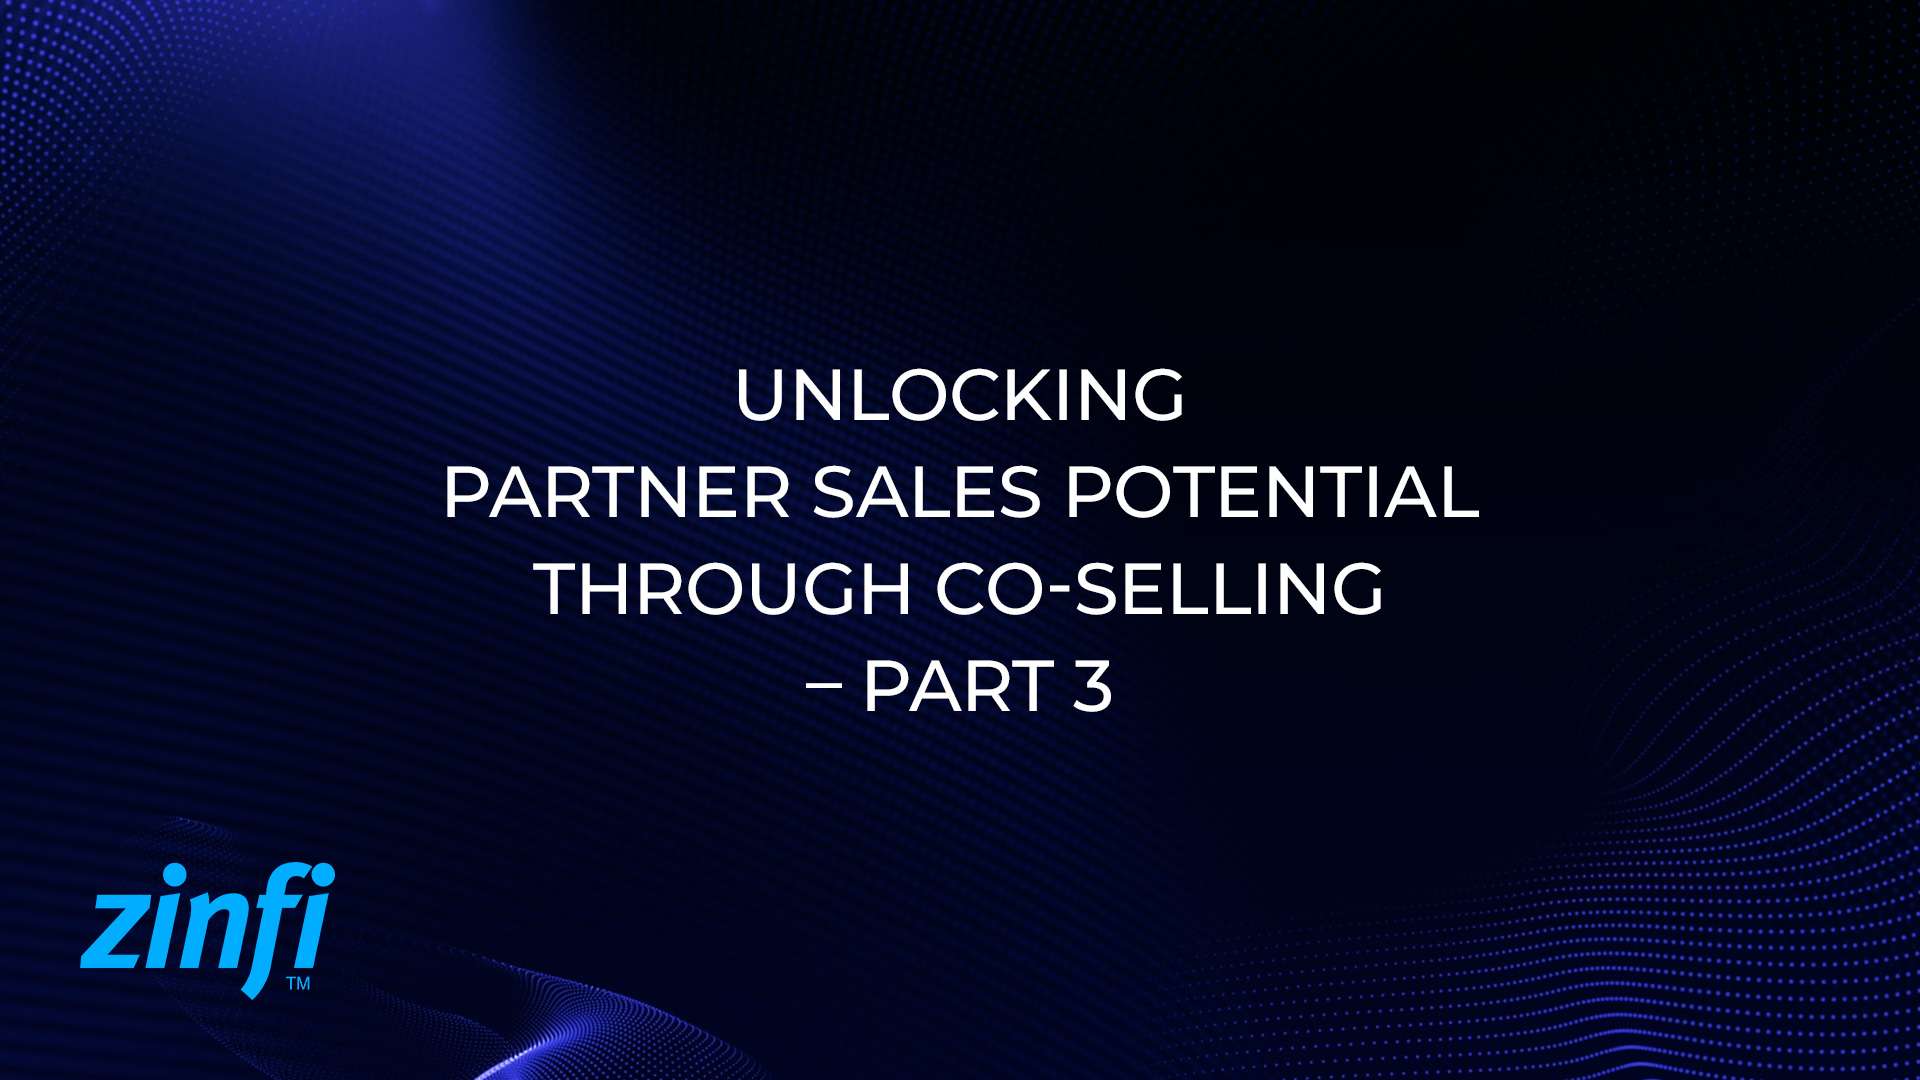 Partner Sales Potential through Co-Selling – Part 3